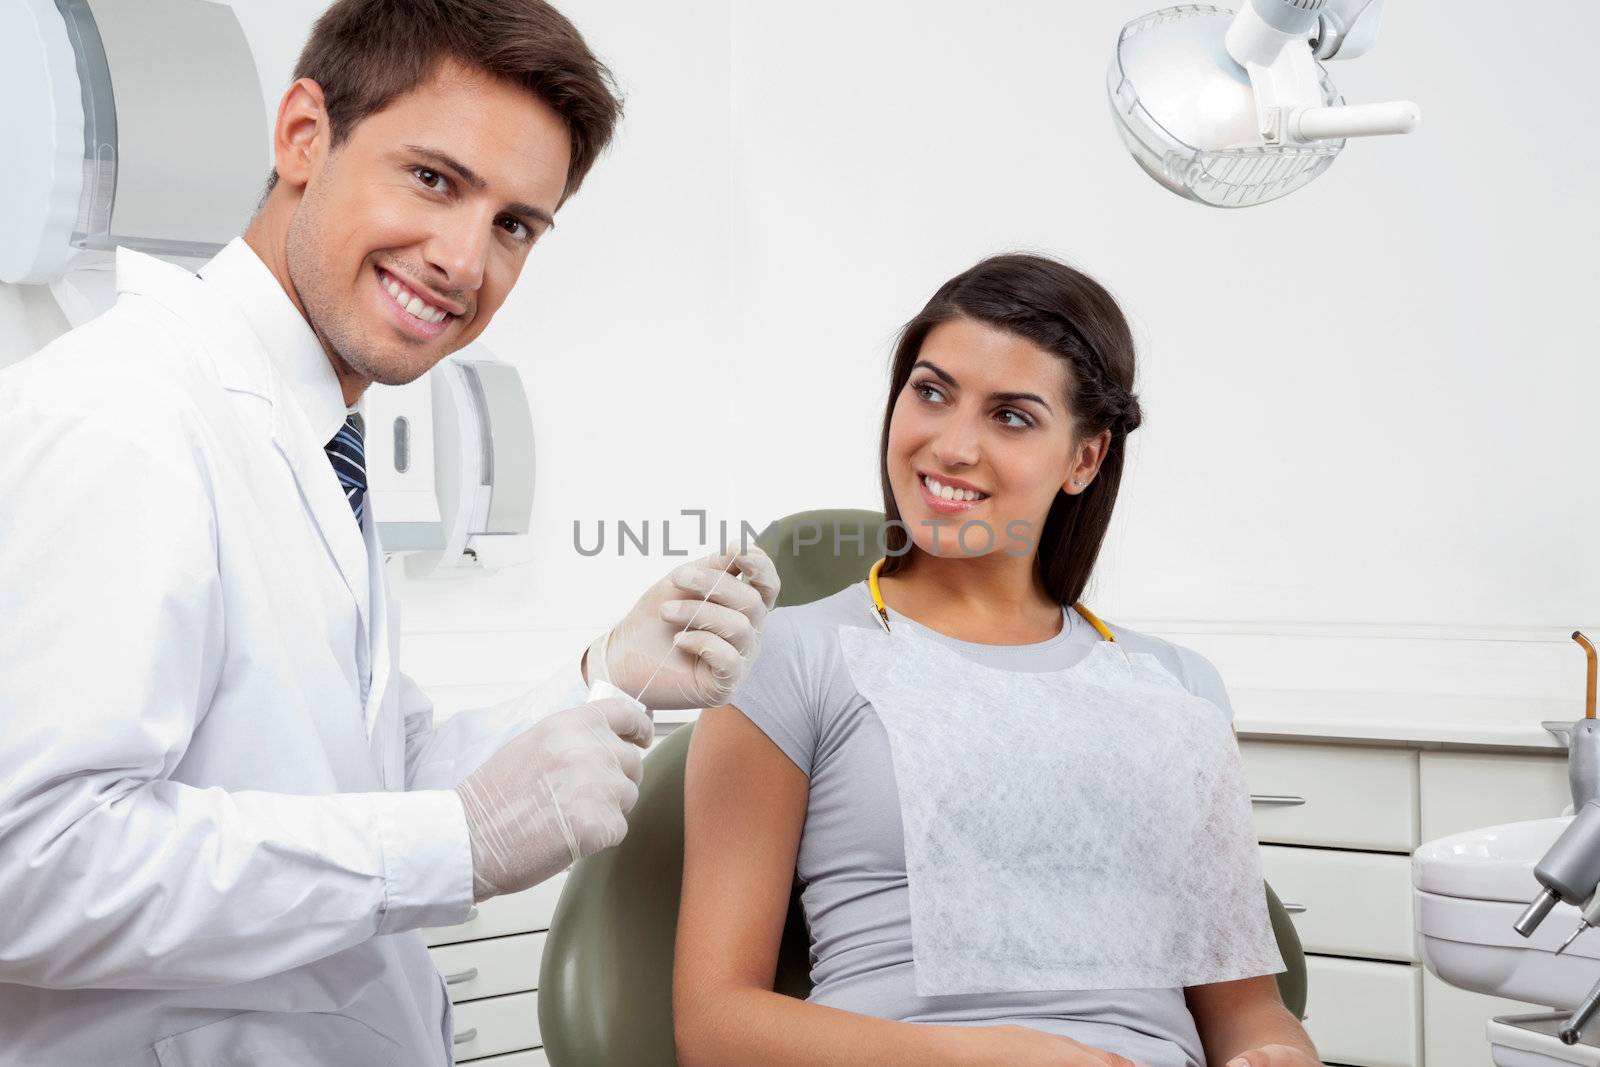 Portrait of happy young male dentist holding thread while patient looking at him in clinic